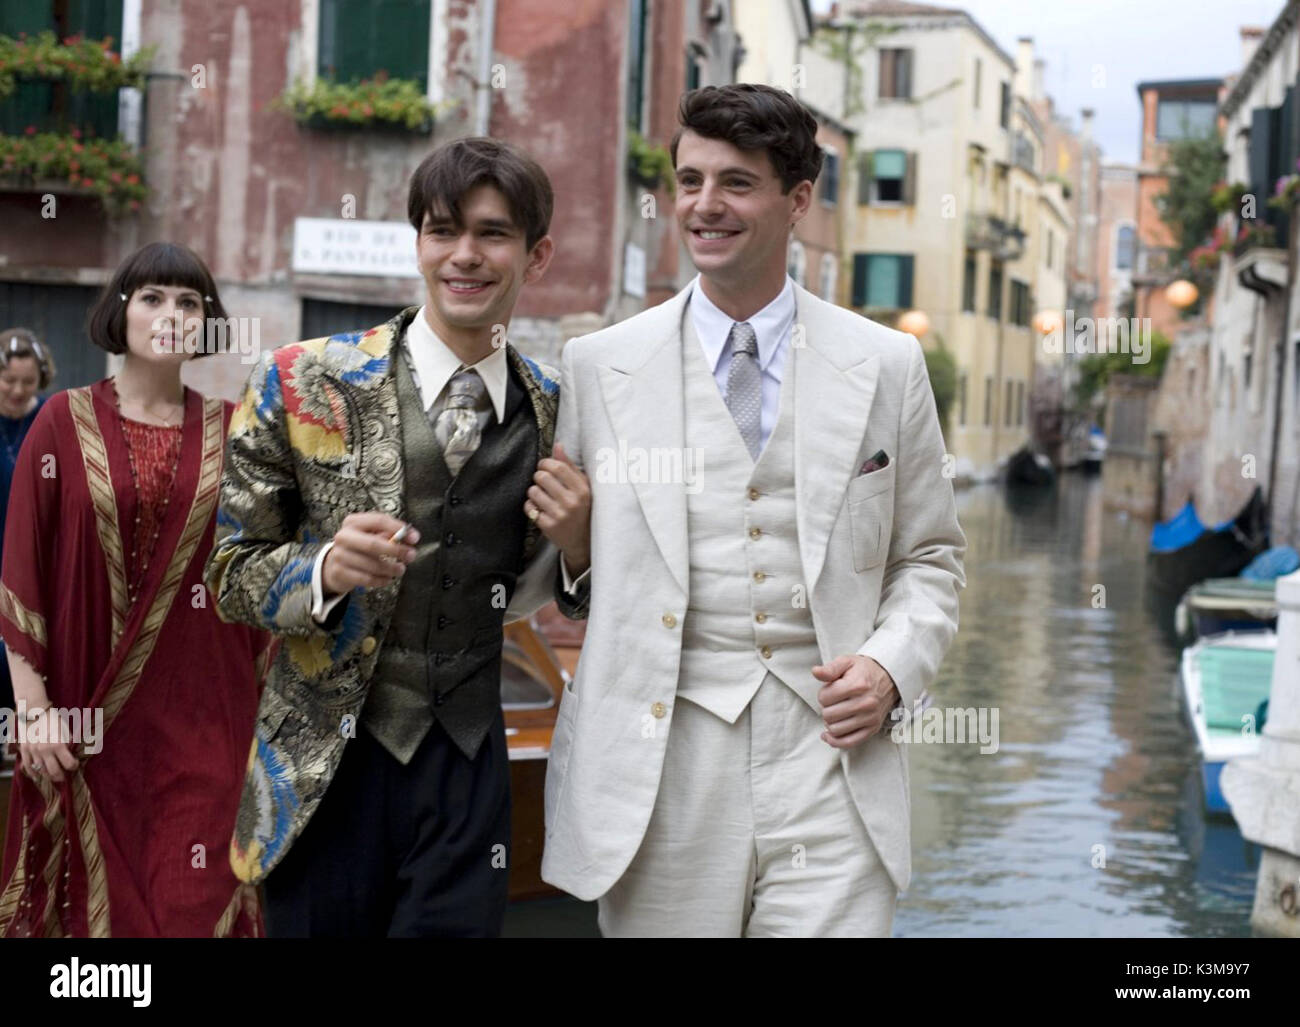 BRIDESHEAD REVISITED HAYLEY ATWELL come Julia Flyte, BEN WHISHAW come Sebastian Flyte, Matthew Goode come Charles Ryder Brideshead Revisited HAYLEY ATWELL come Julia Flyte, BEN WHISHAW come Sebastian Flyte, Matthew Goode come Charles Ryder data: 2008 Foto Stock